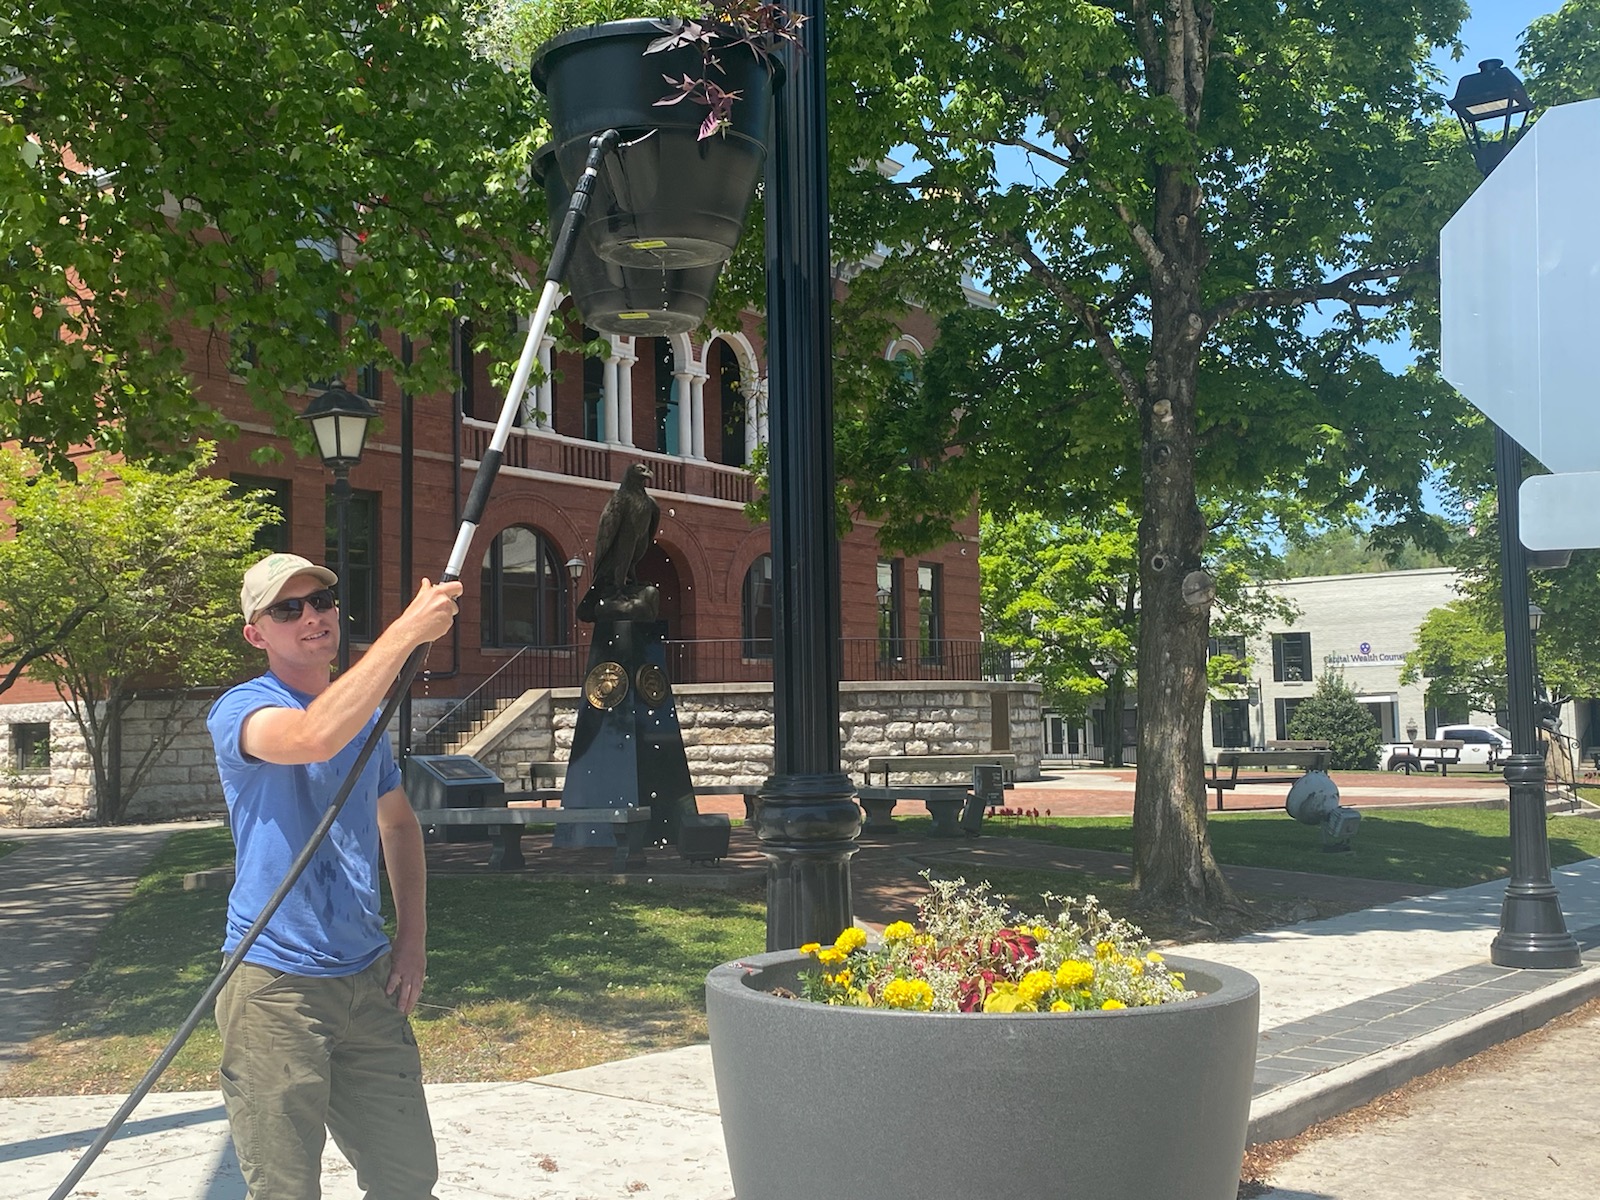 New Hanging Pots and Ground Planters Adorn Downtown Area